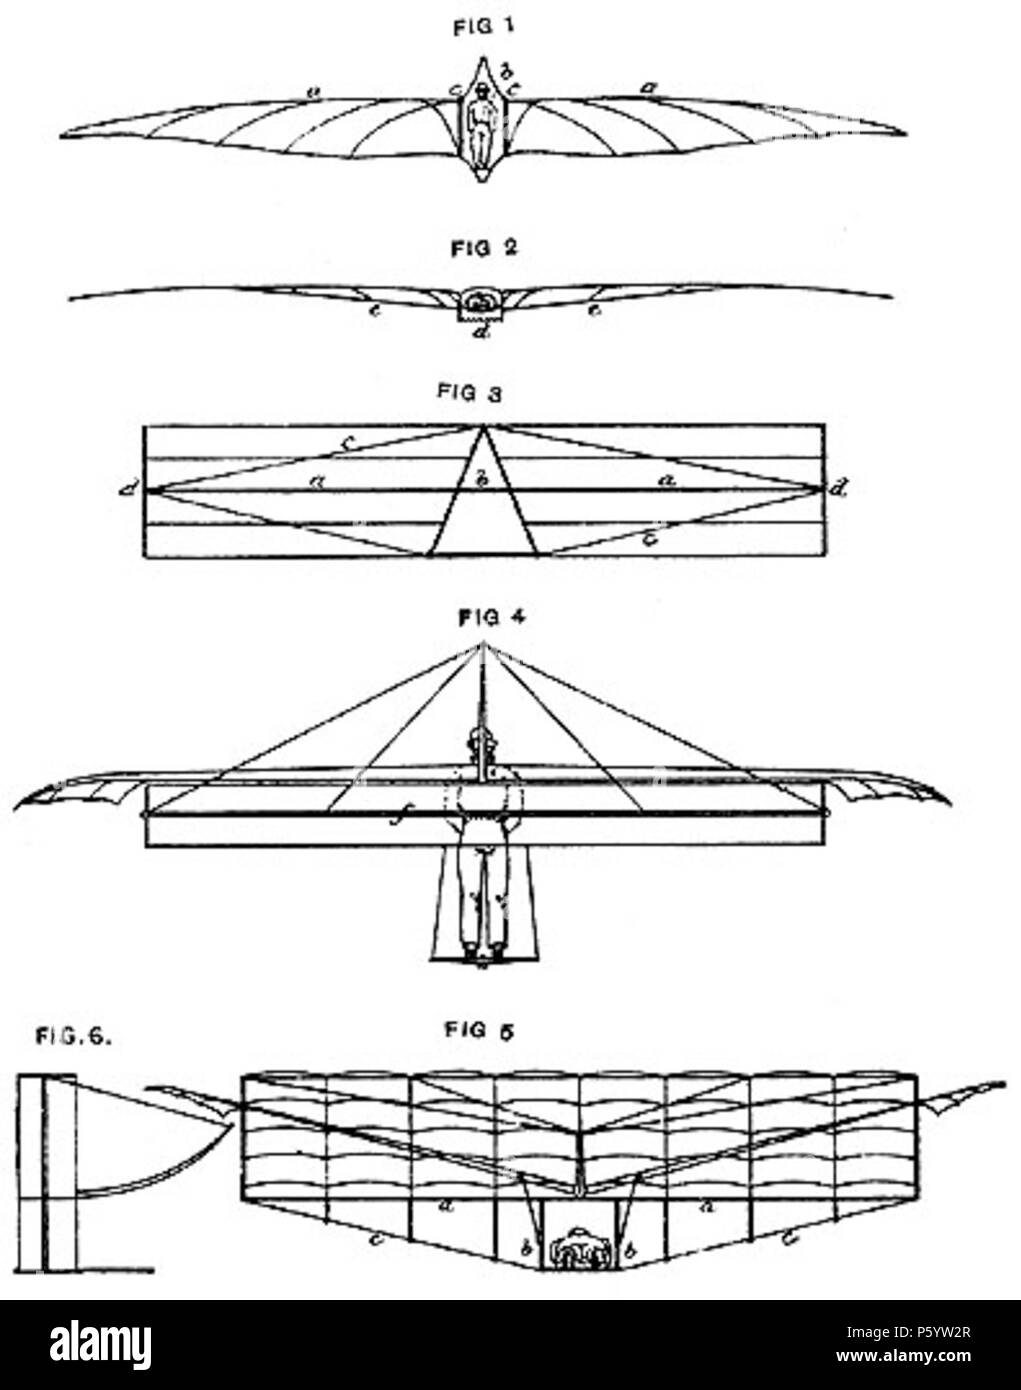 N/A. English: Fig. 1: Top view of a gliding machine illustrating the total surface area required to sustain aloft a human of average weight (note the wing's high aspect-ratio). Fig. 2: Rear view of the same design, showing the prone position which Wenham suggested for the gliding machine's operator. Fig. 3: Front view of a multi-winged gliding machine trussed with 'thin bands of iron' (c) and vertical wing struts (d). Fig. 4: A more refined design, incorporating small wing-like propellers on each end, operated by motion of the operator's feet and arranged so that the propellers could be operat Stock Photo